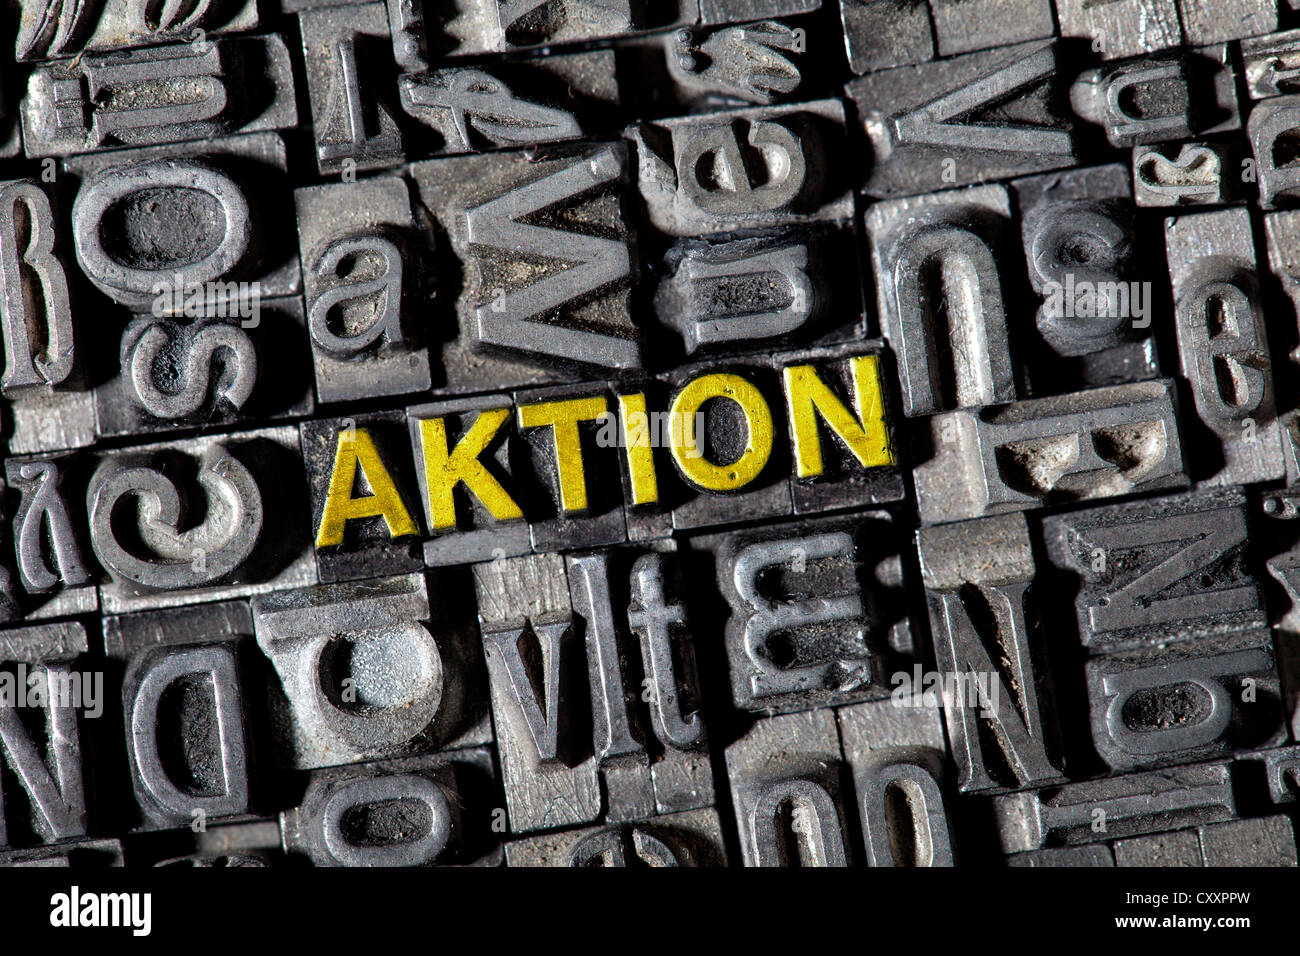 Old lead letters forming the word 'AKTION', German for 'action' Stock Photo